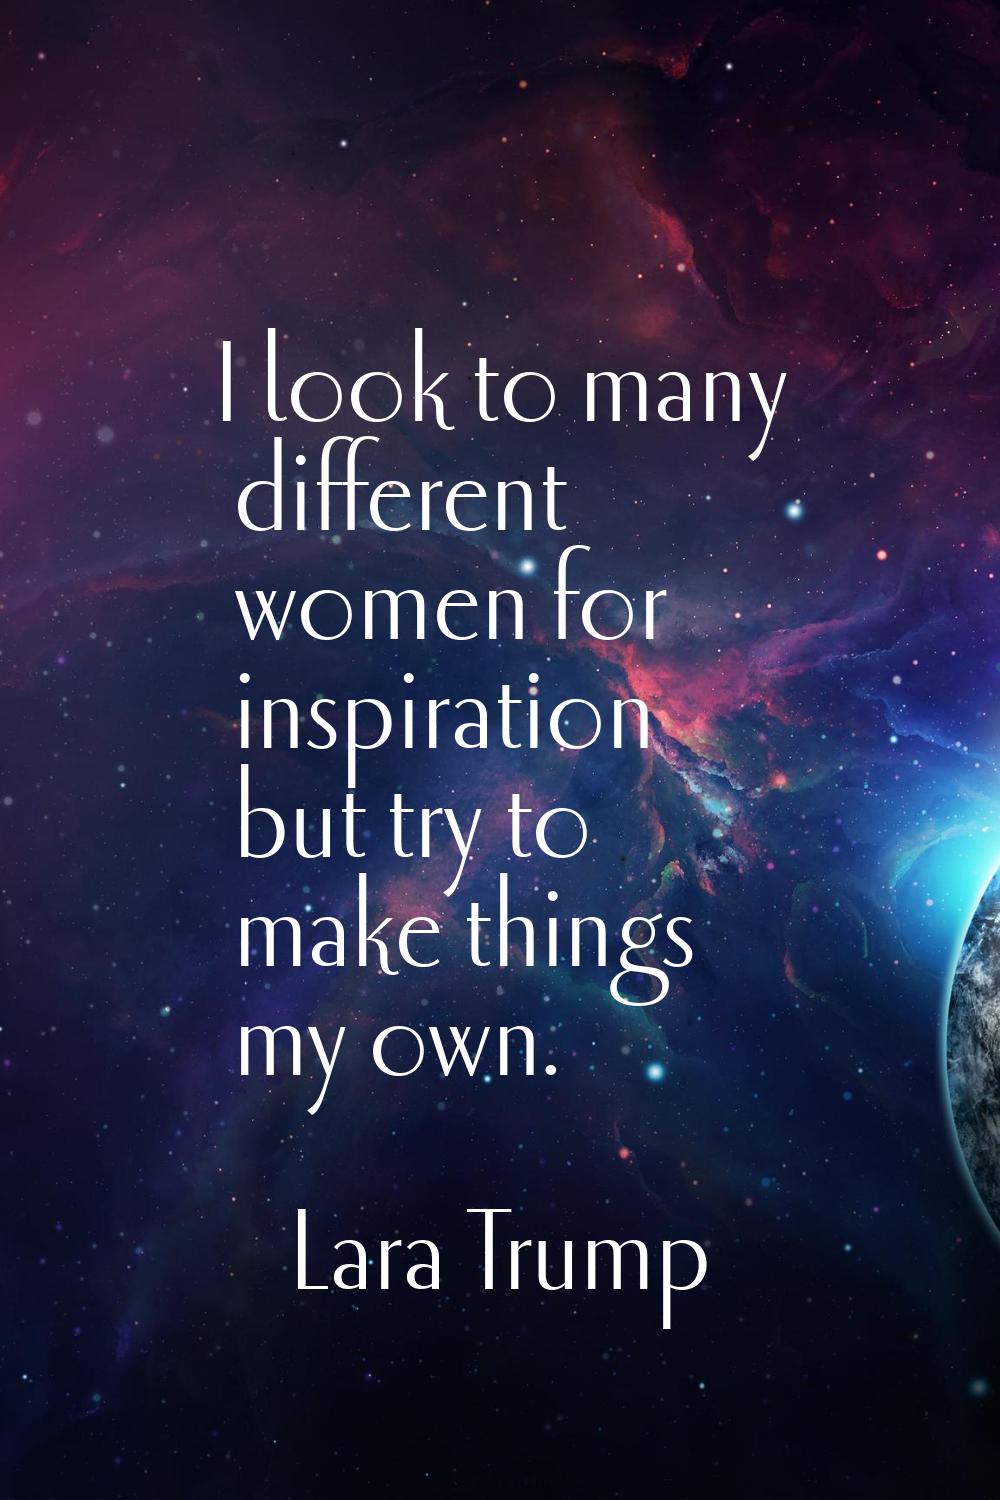 I look to many different women for inspiration but try to make things my own.